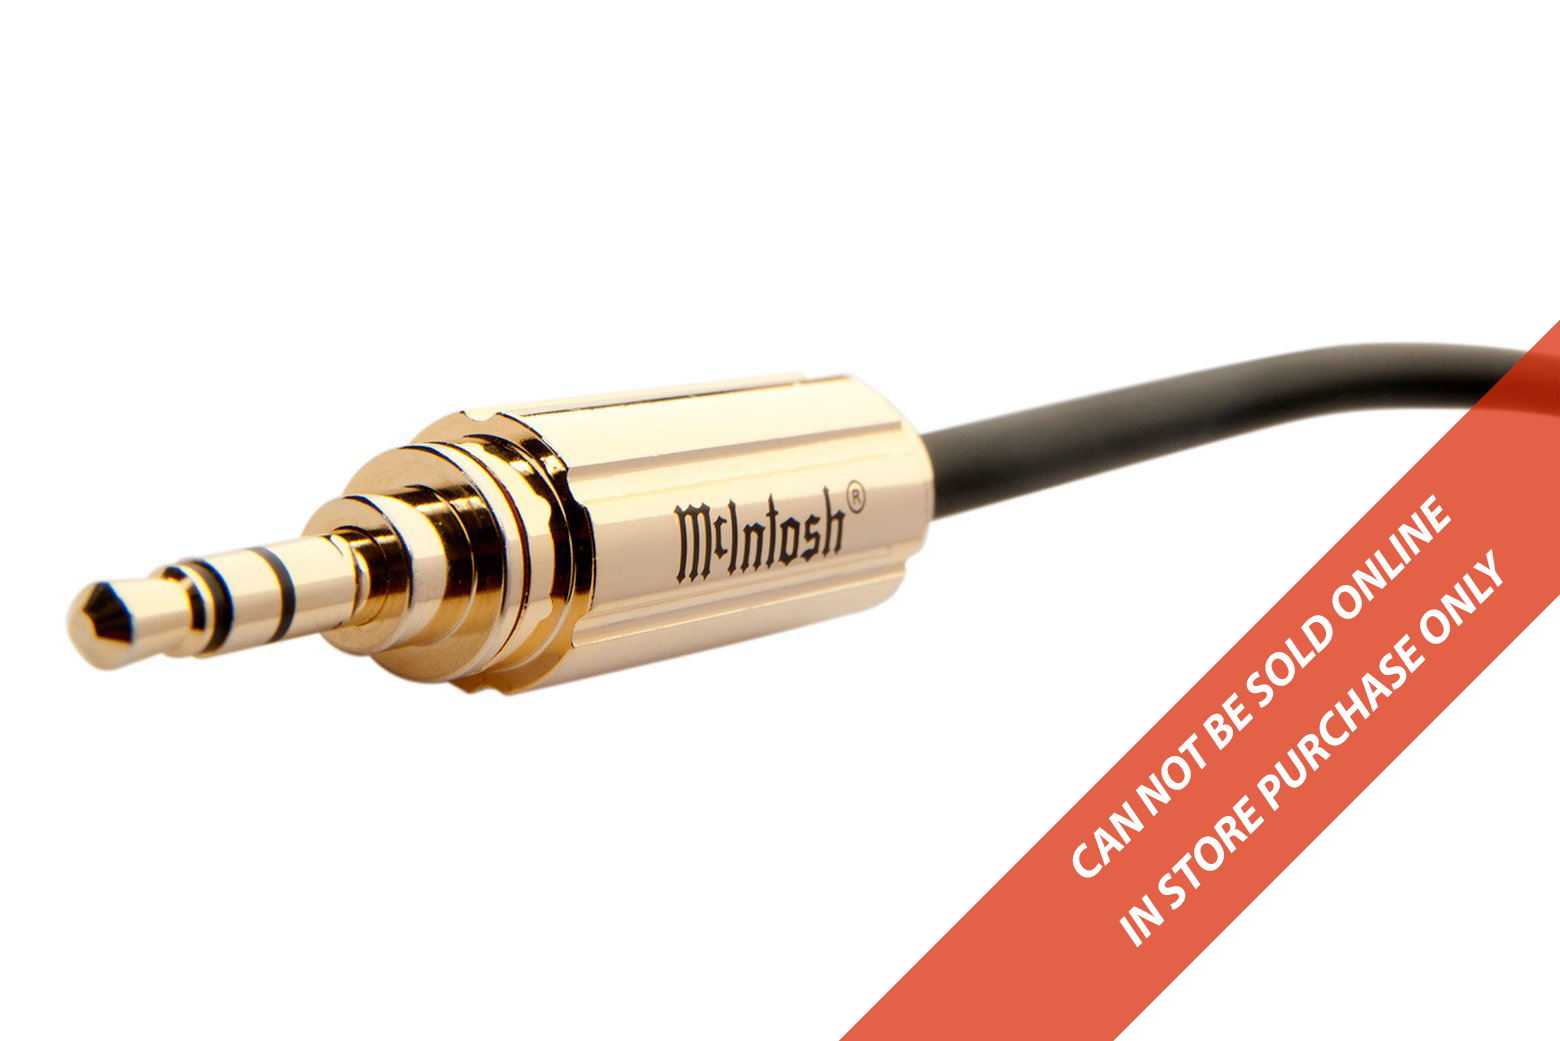 McIntosh Power Control Cables - Sold as a Single (In-Store Purchases Only & USD Pricing)